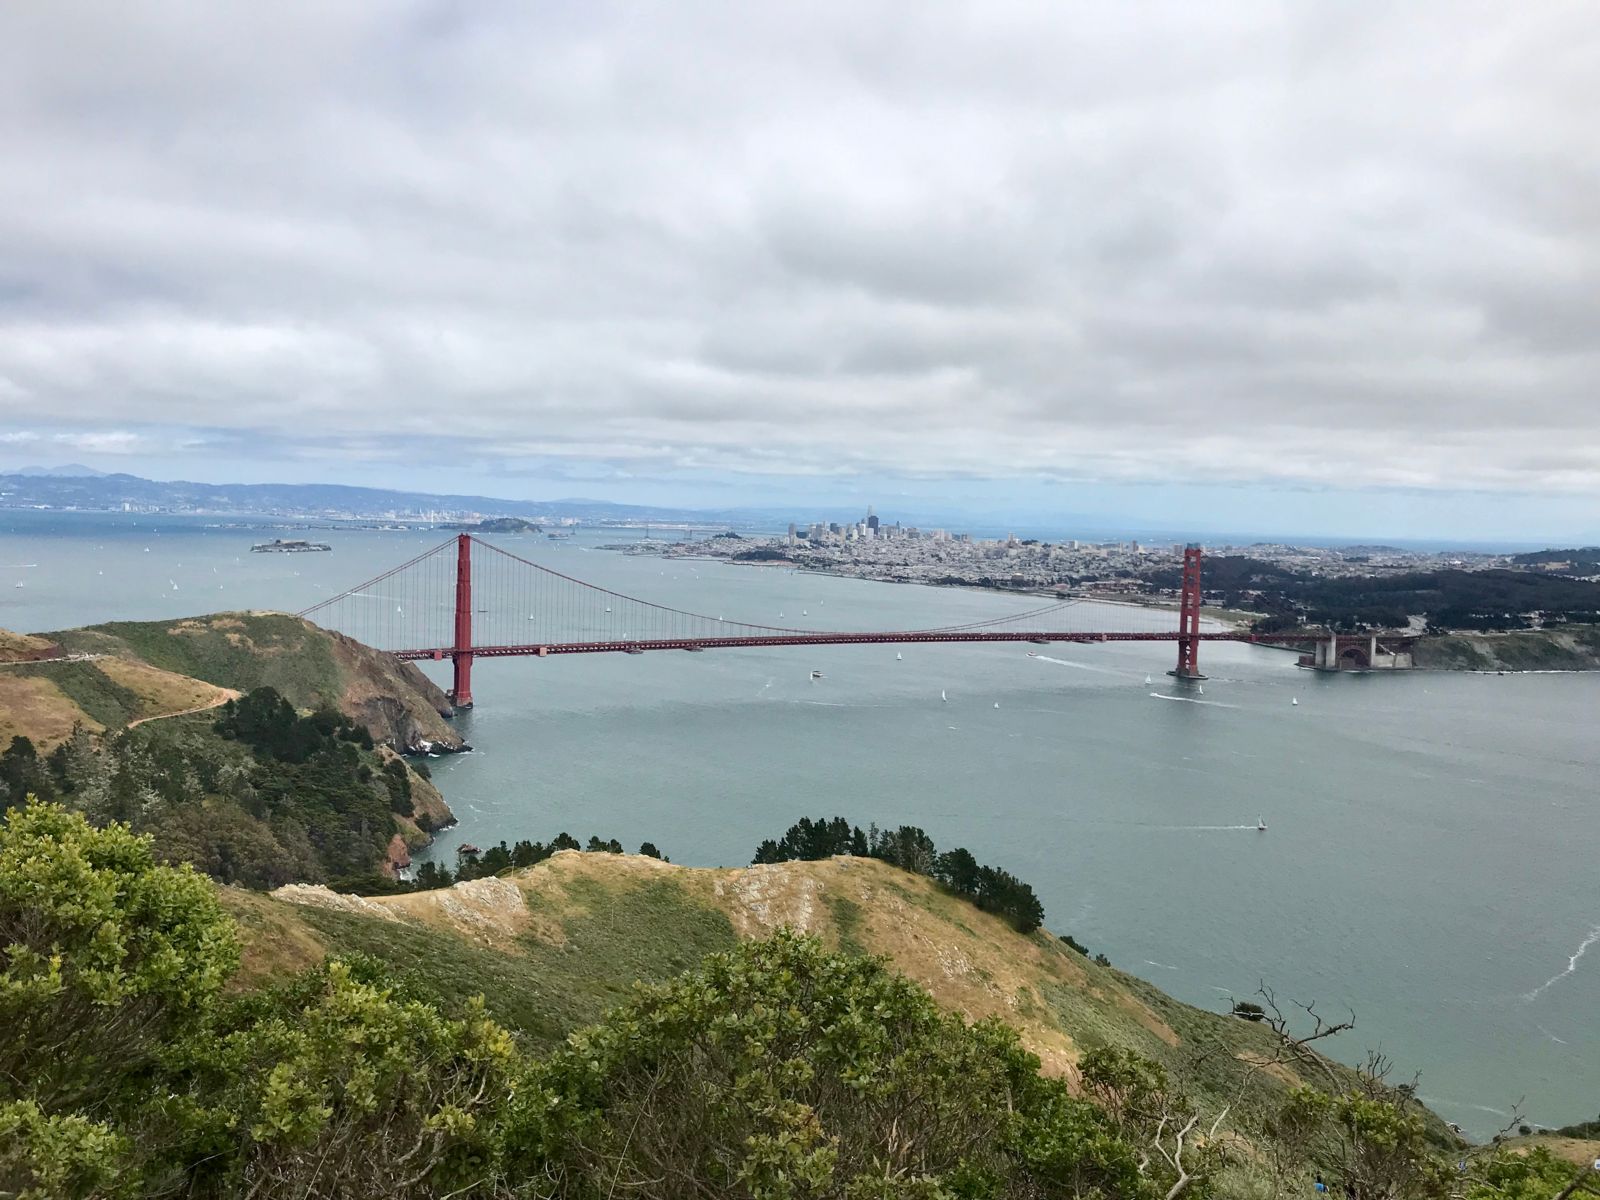 View of The Golden Gate Bridge and San Francisco from Hawk Hill